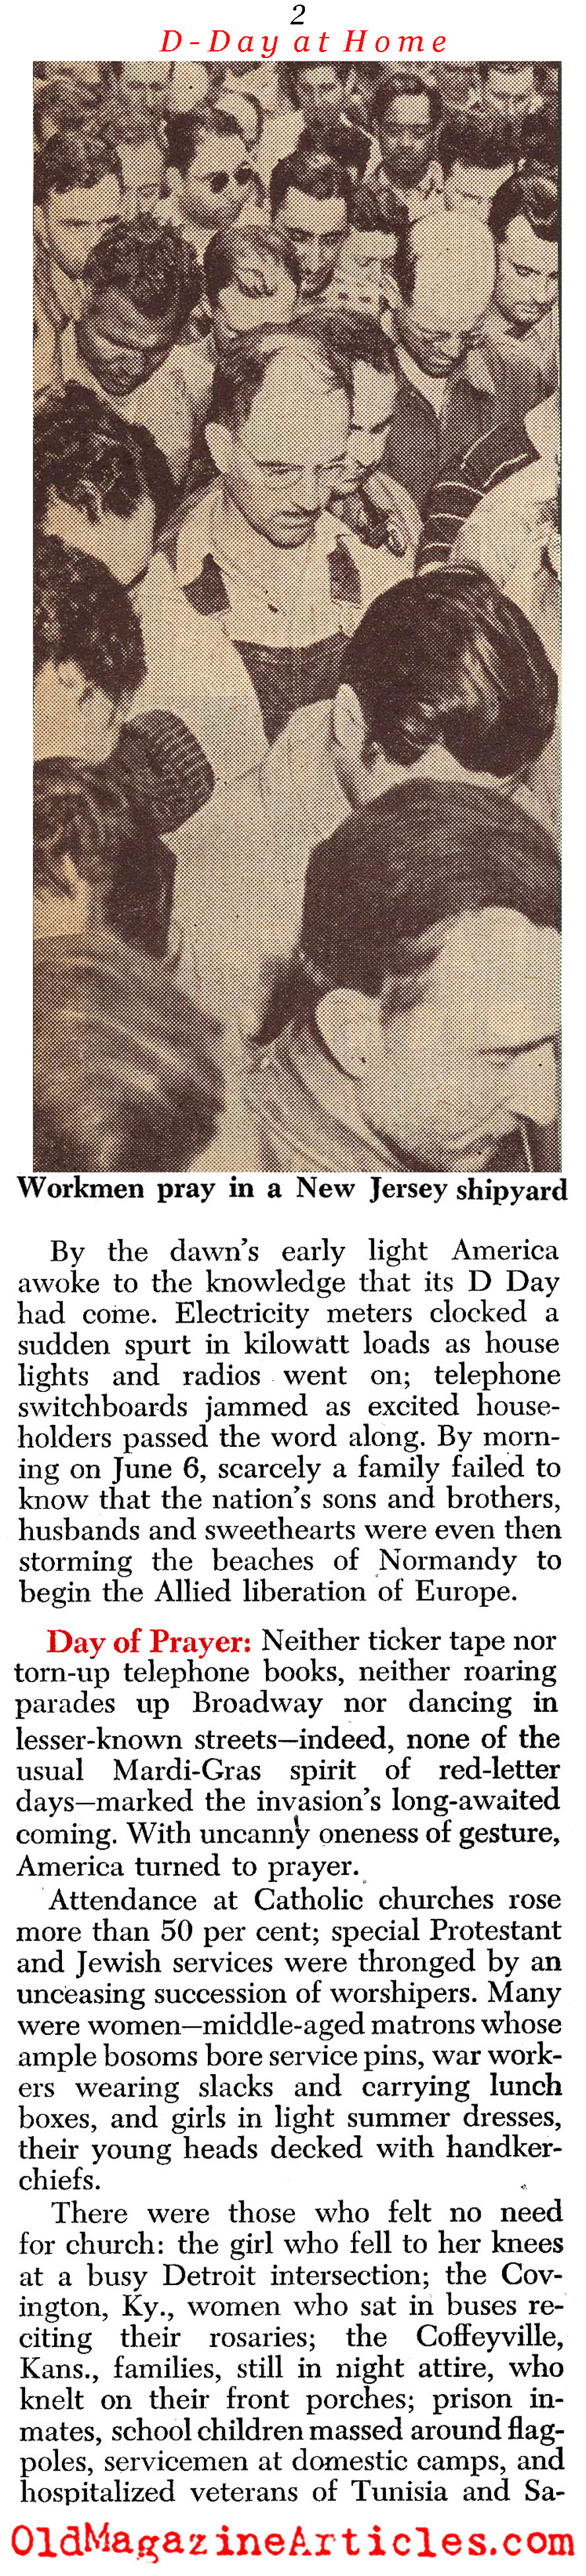 D-Day On The Home Front (Newsweek Magazine, 1944)